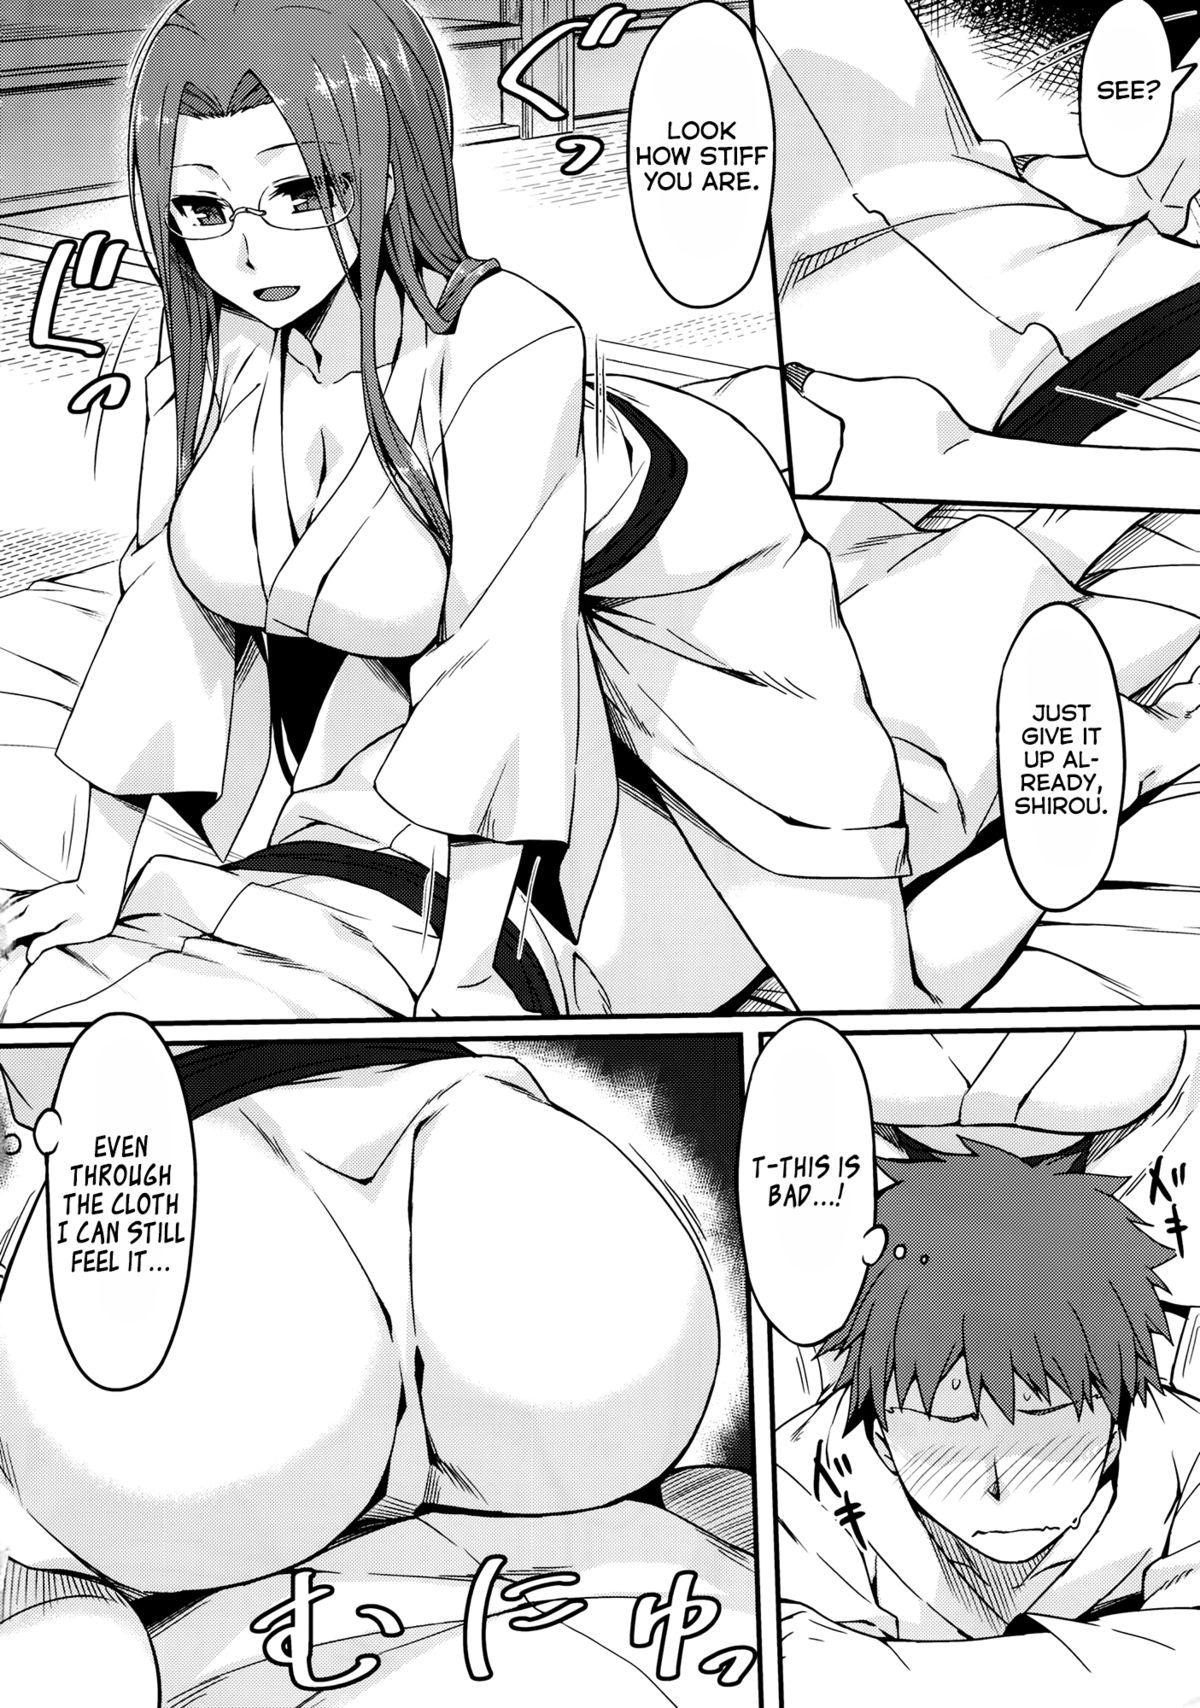 Hot Girl Pussy (C88) [S.S.L (Yanagi)] Rider-san to Onsen Yado. Sonogo | Hot Spring Inn With Rider-san. After Story (Fate/stay night) [English] [Facedesk] - Fate stay night Shot - Page 4